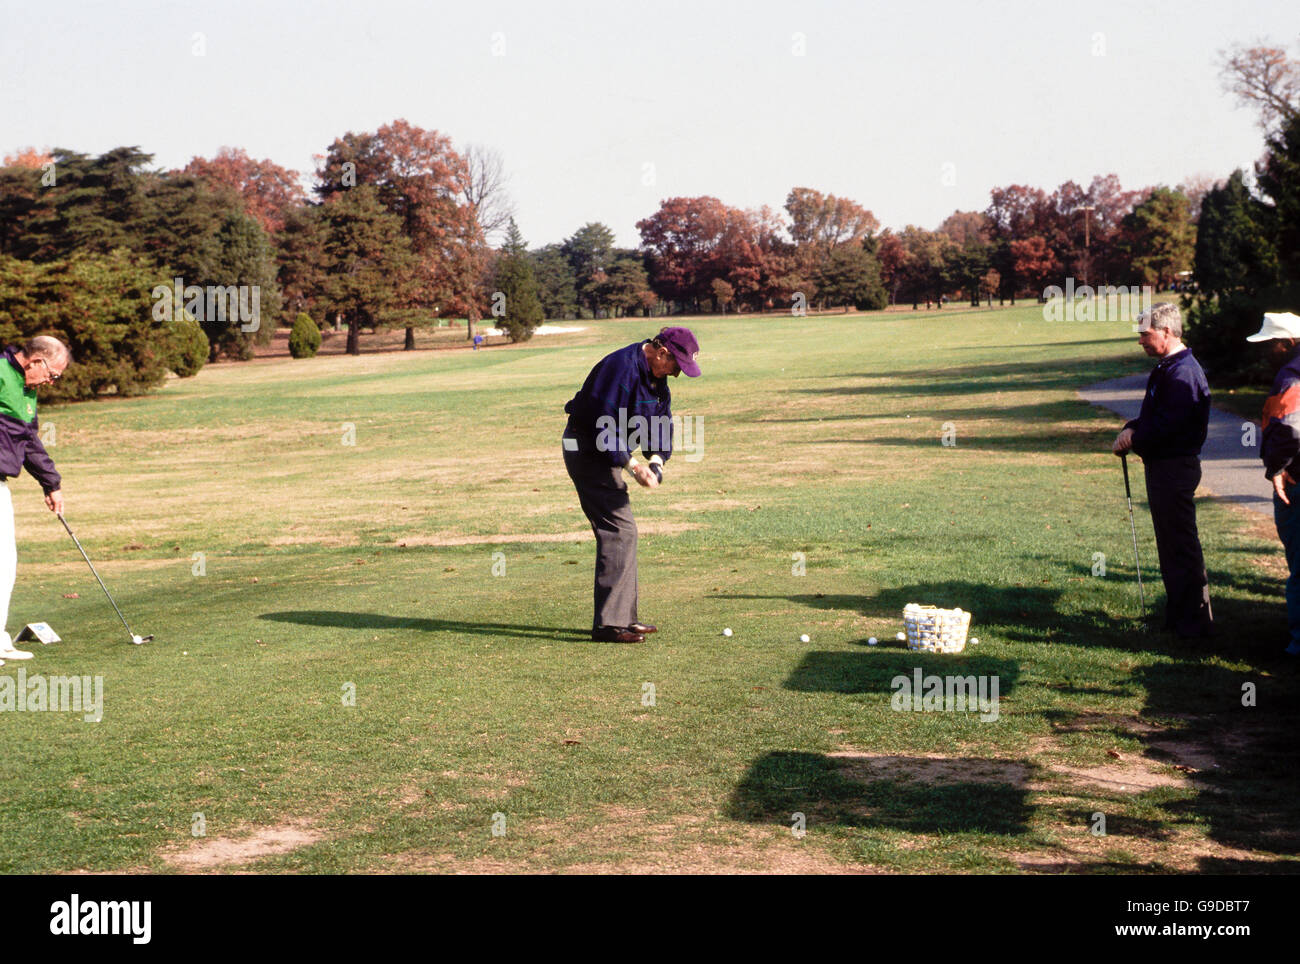 President George H.W. Bush plays golf at Andrews Air Force Base in Maryland  Credit: Mark Reinsteini Stock Photo - Alamy